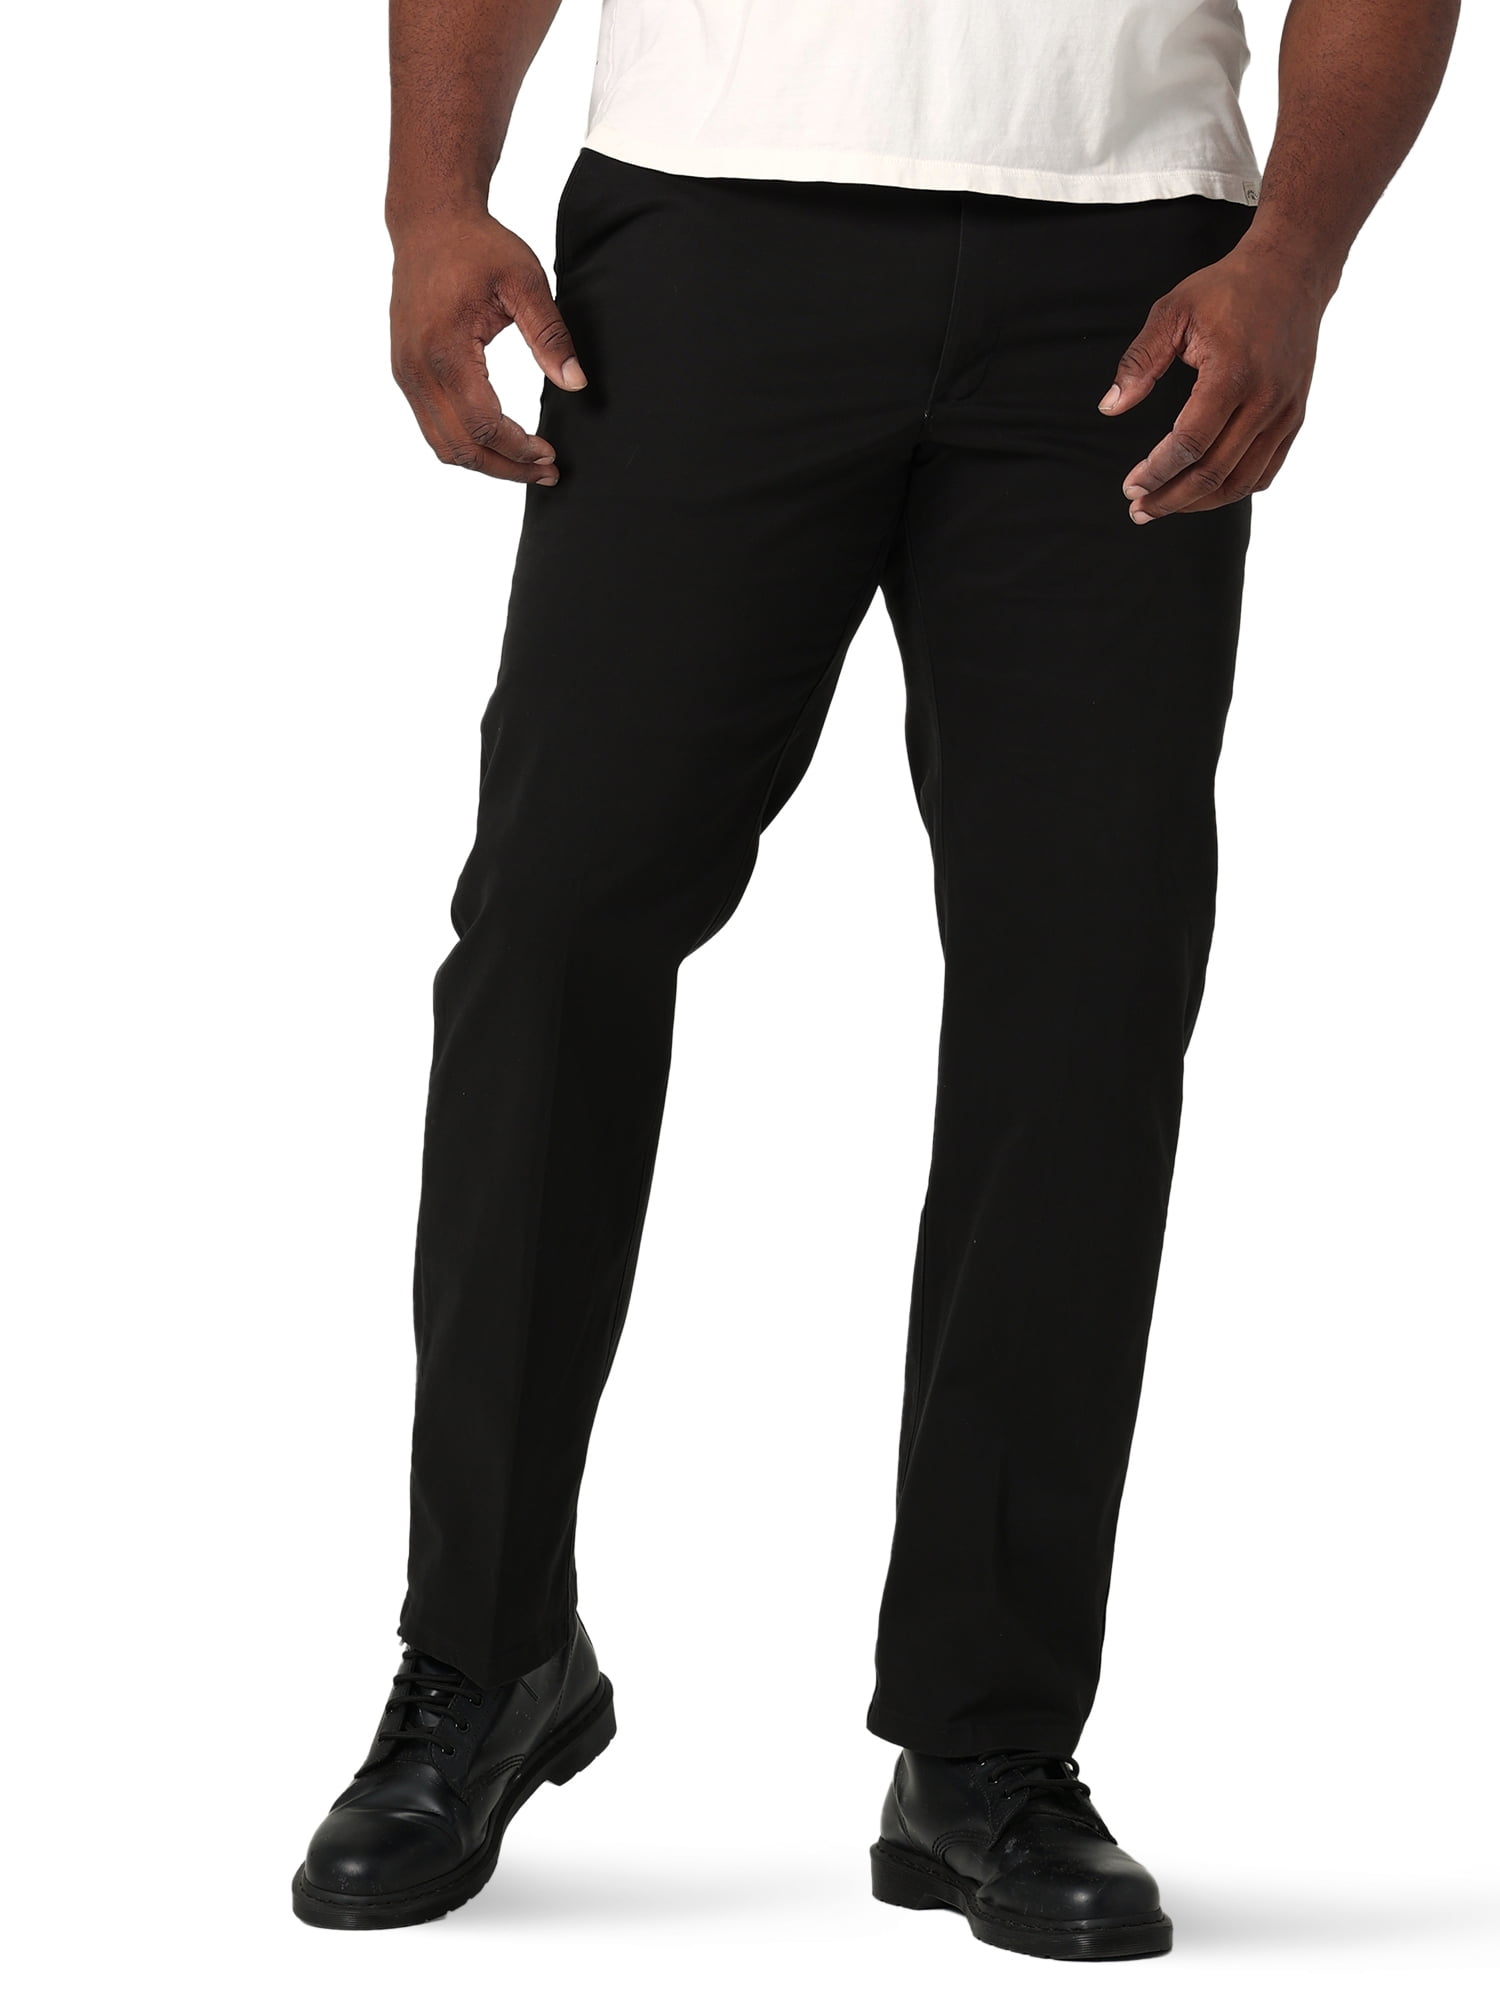 Lee® Men's Big and Tall Extreme Comfort Flat Front Pant